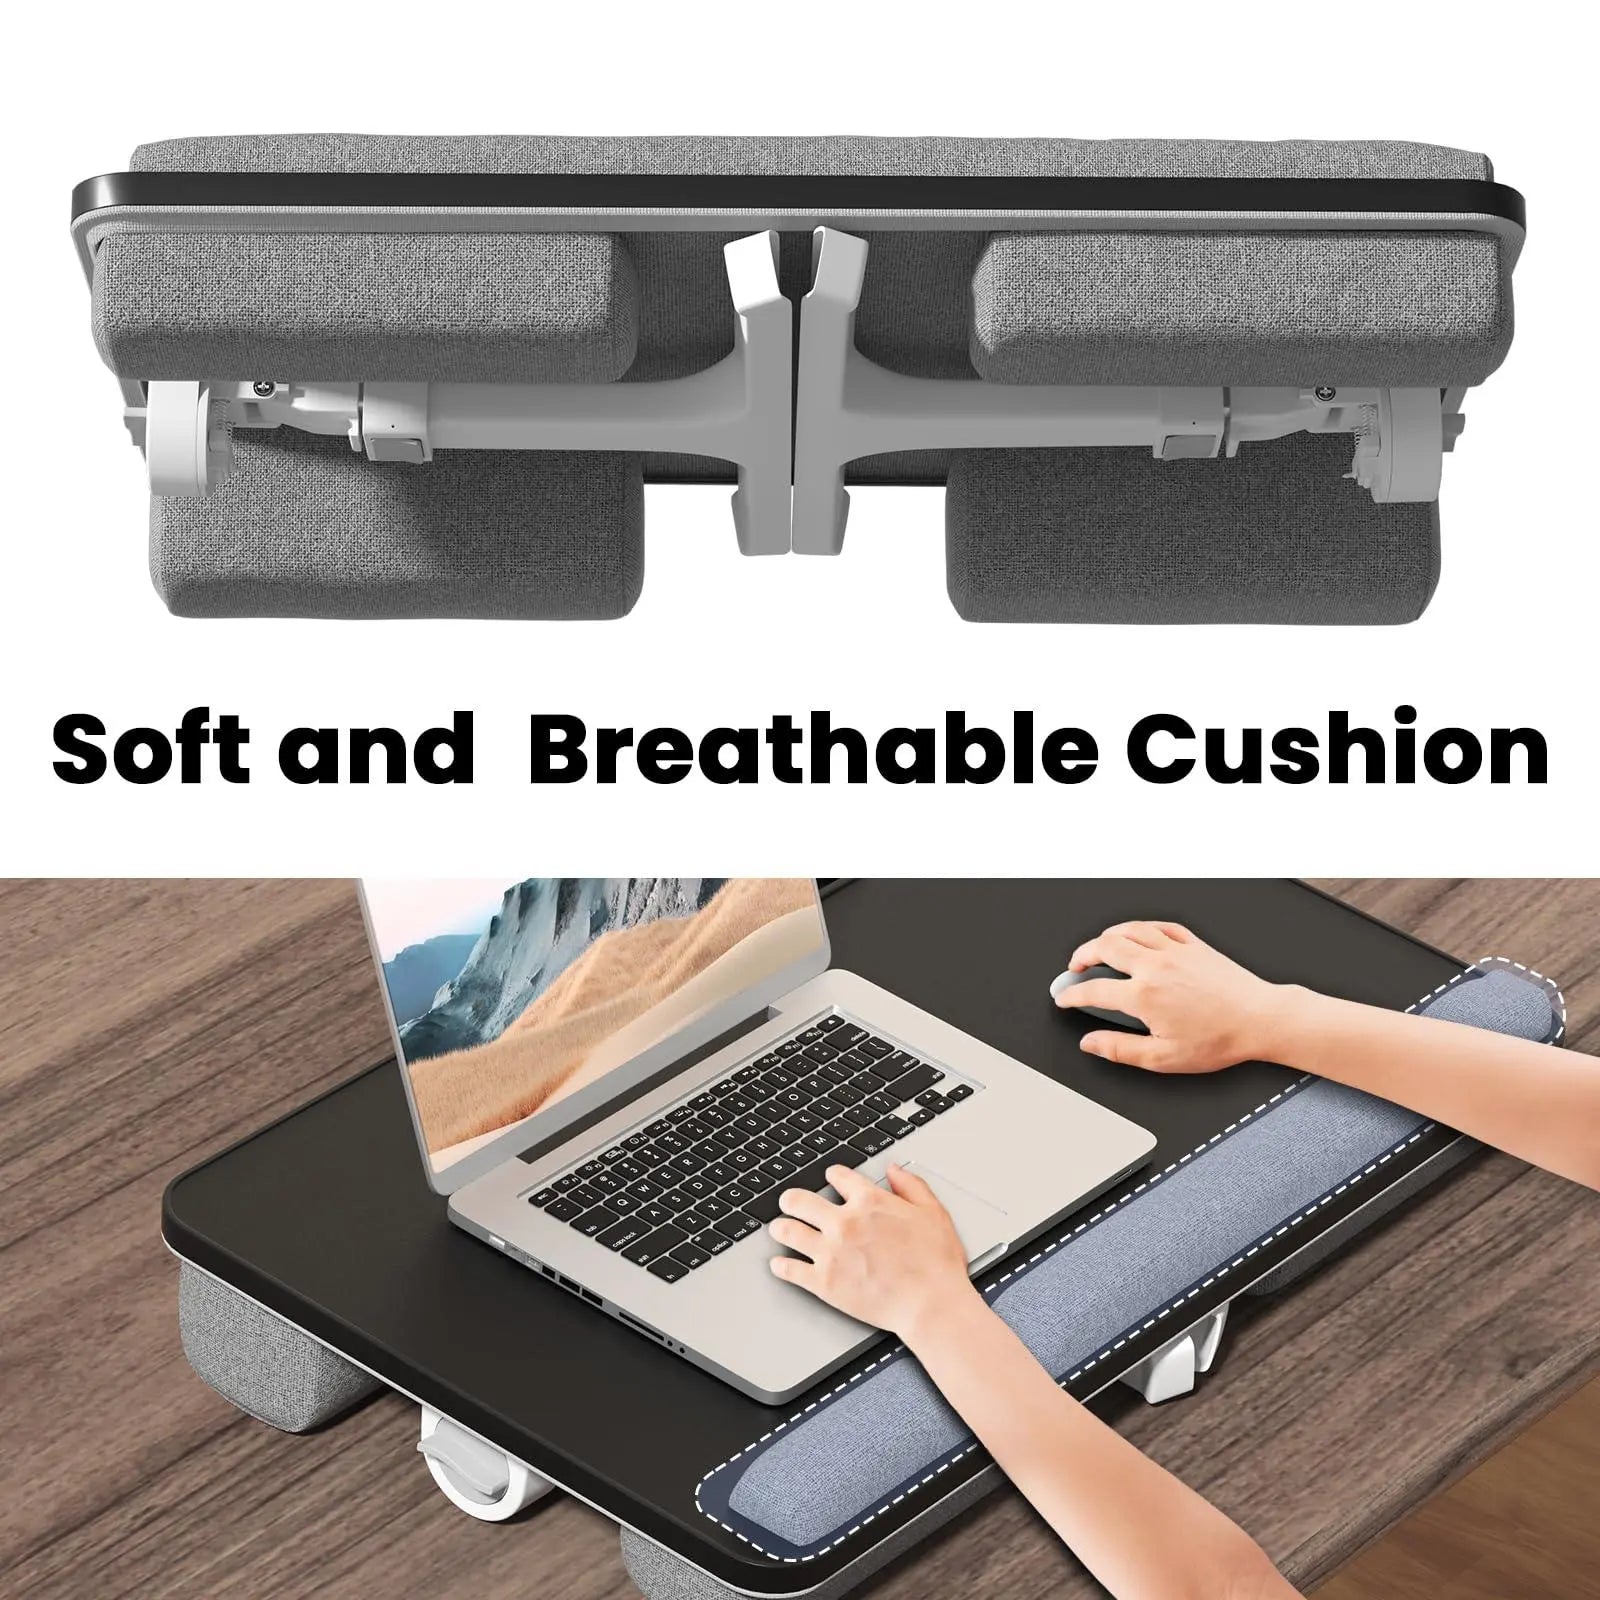 PUTORSEN laptop table & laptop cushion for bed and sofa, with carabiner for locking, unnecessary mouse pads, height-adjustable laptop stand bed, fits up to 17" laptop, 60.7 * 37cm PUTORSEN